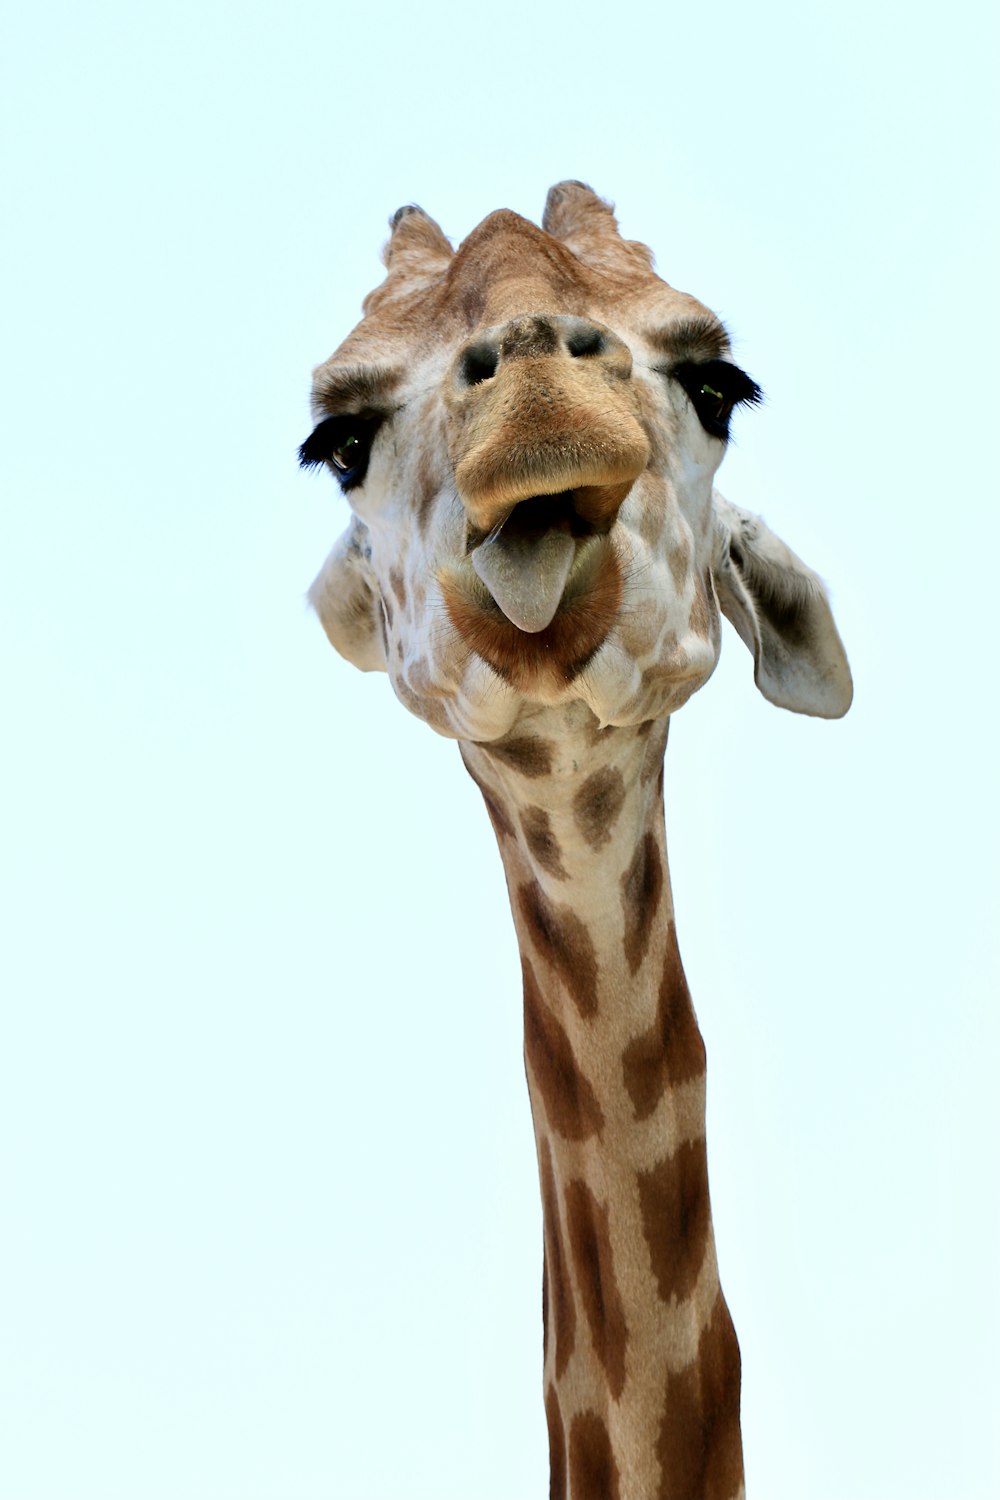 a close up of a giraffe's face with a sky background